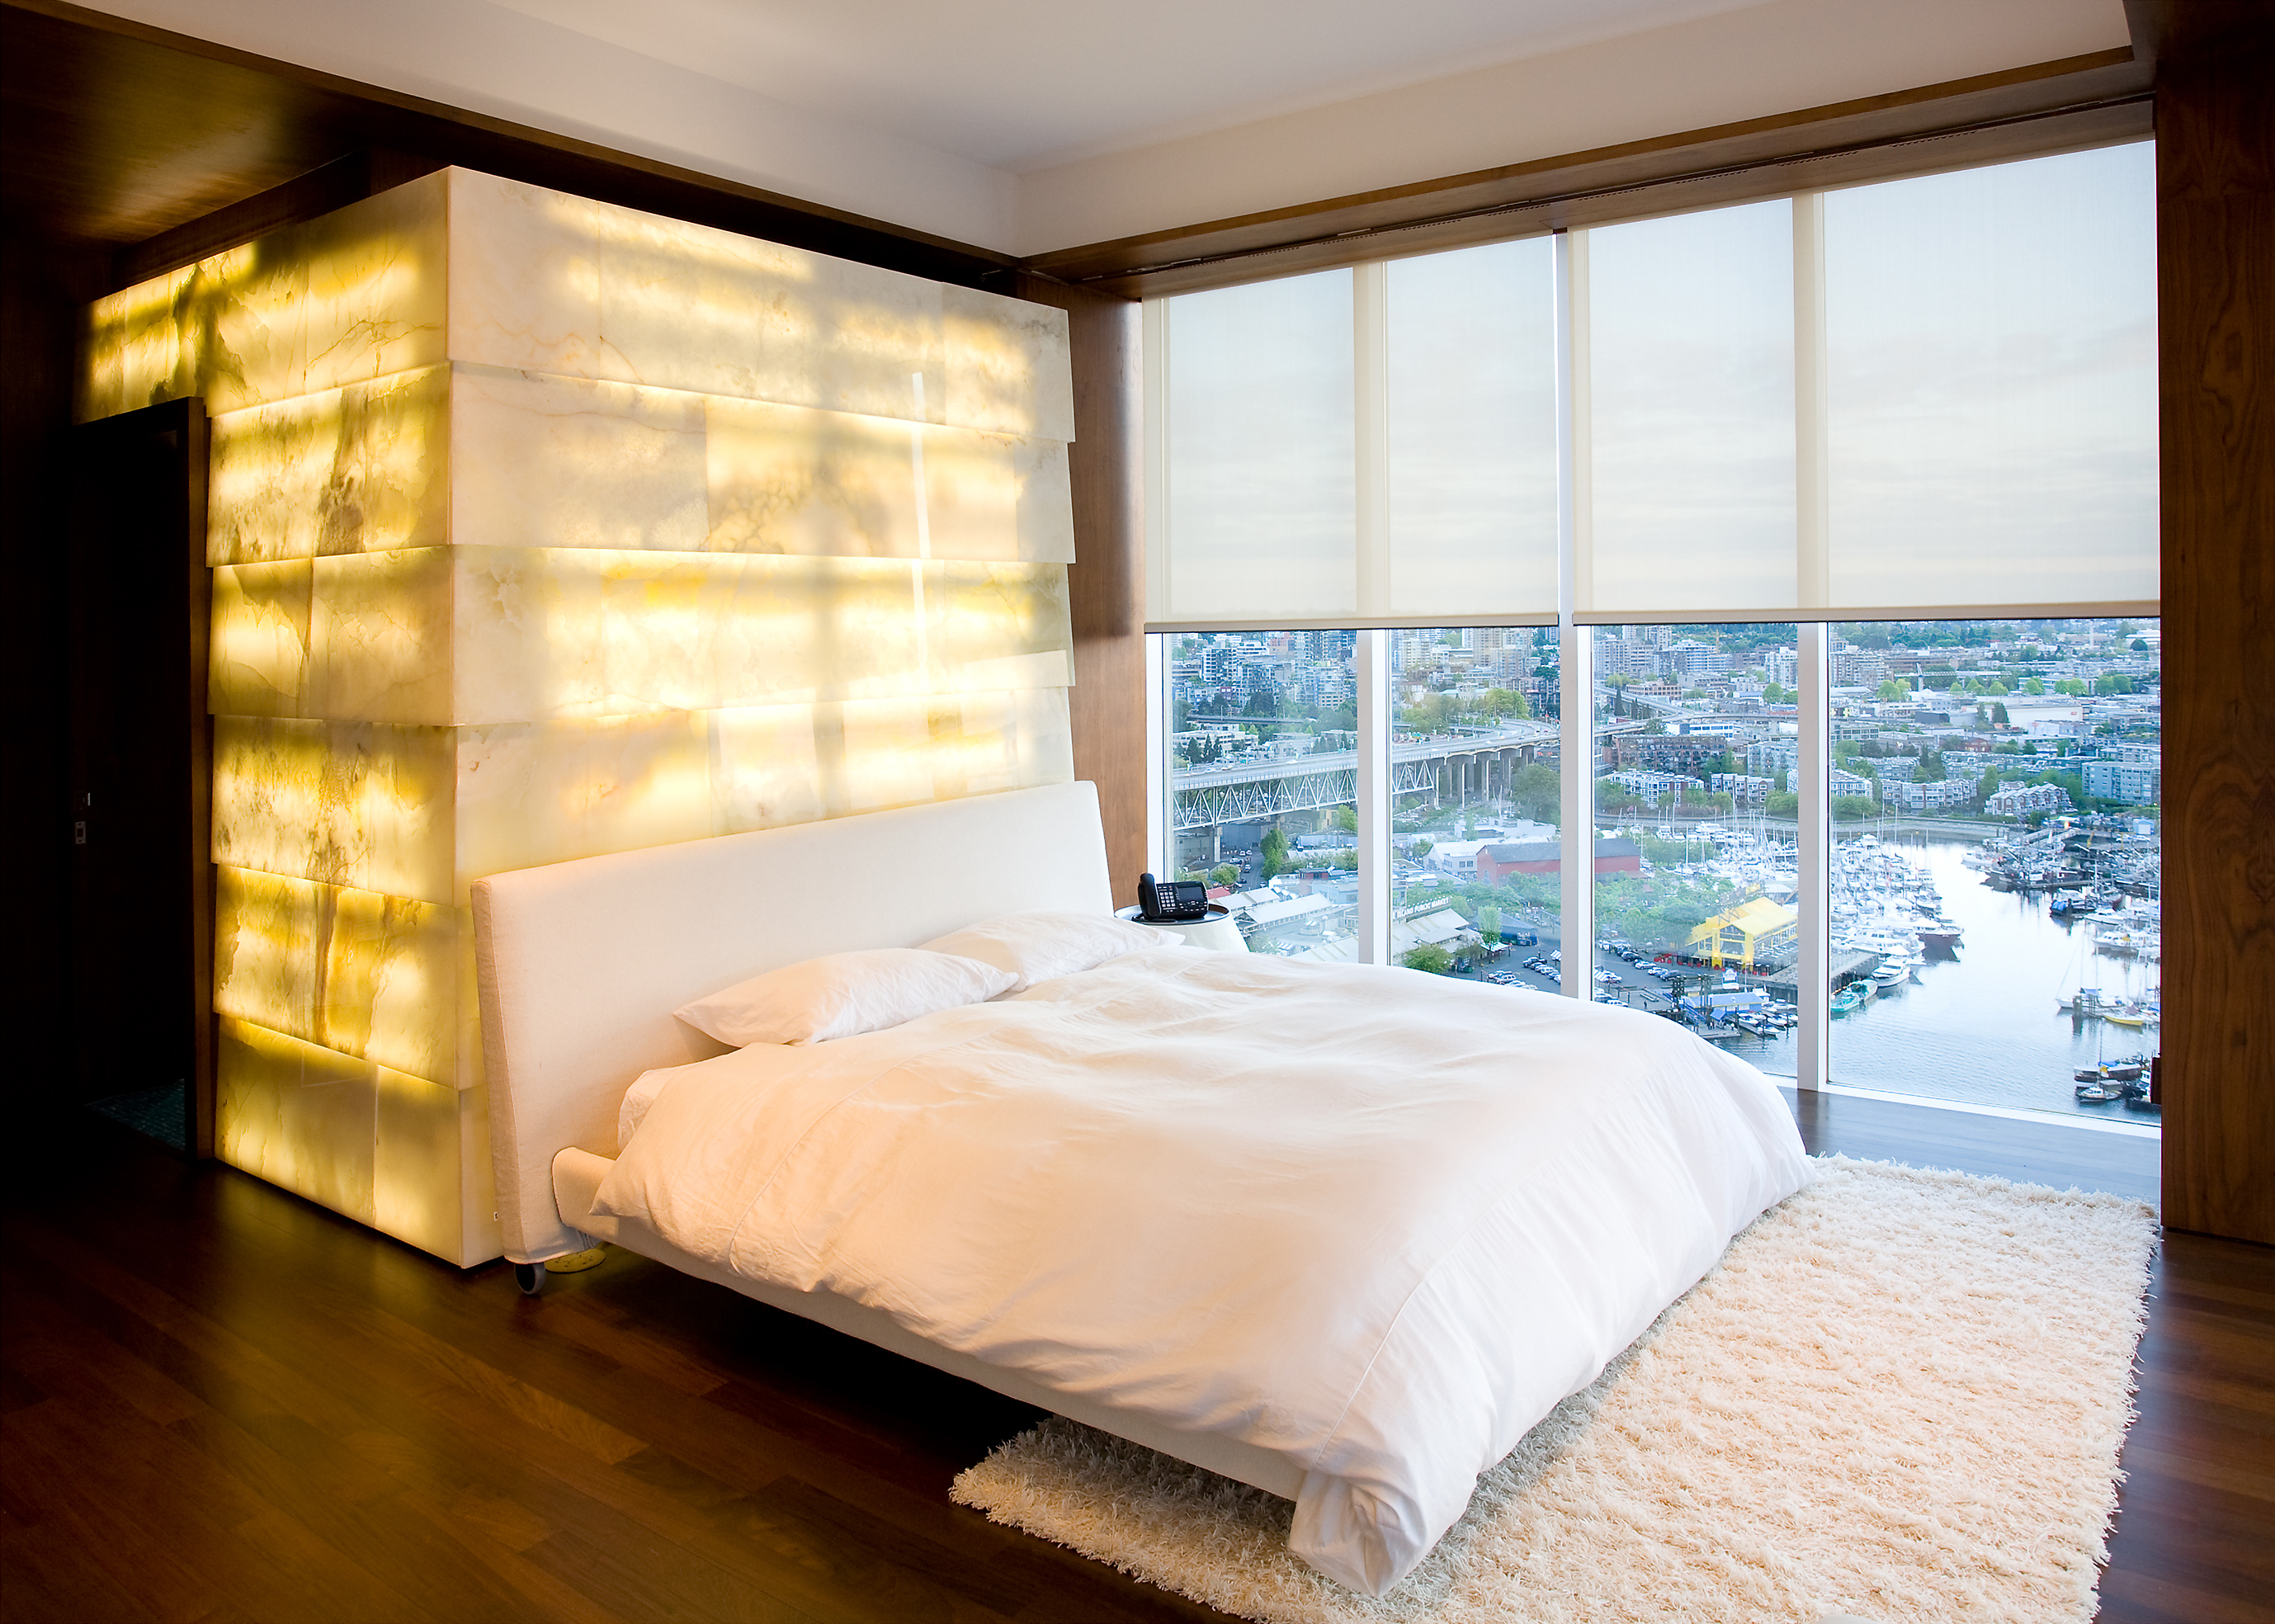 Motorized Window Treatments as Smart Home & Office Solutions from RTI